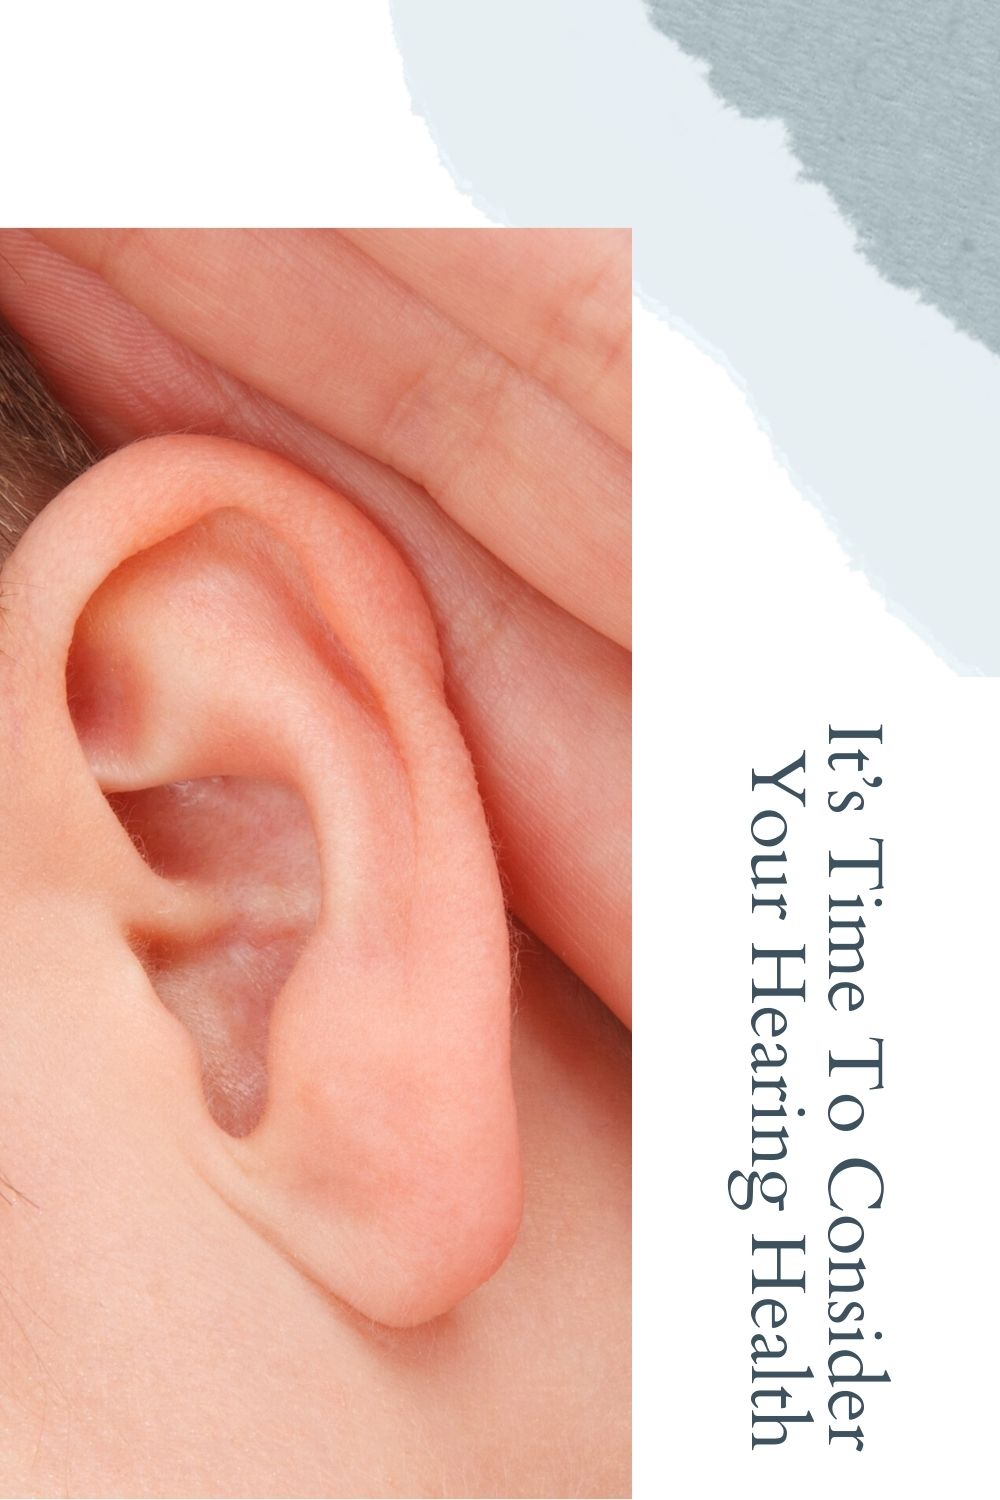 It’s Time To Consider Your Hearing Health